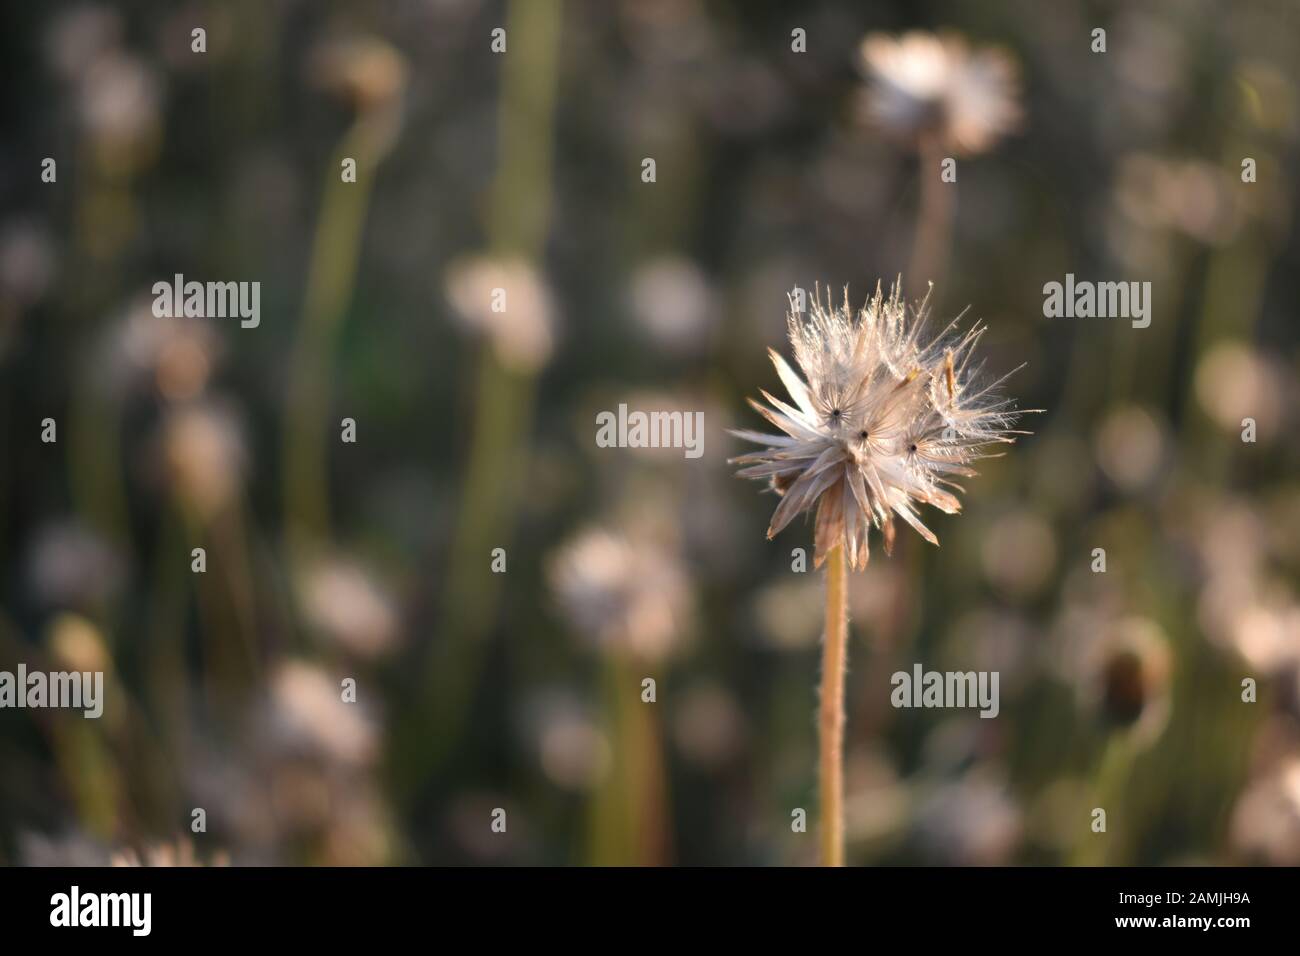 Achenes of tridax daisy or coatbuttons flower or Tridax procumbens containing dried seeds. Surakarta, Indonesia. Stock Photo